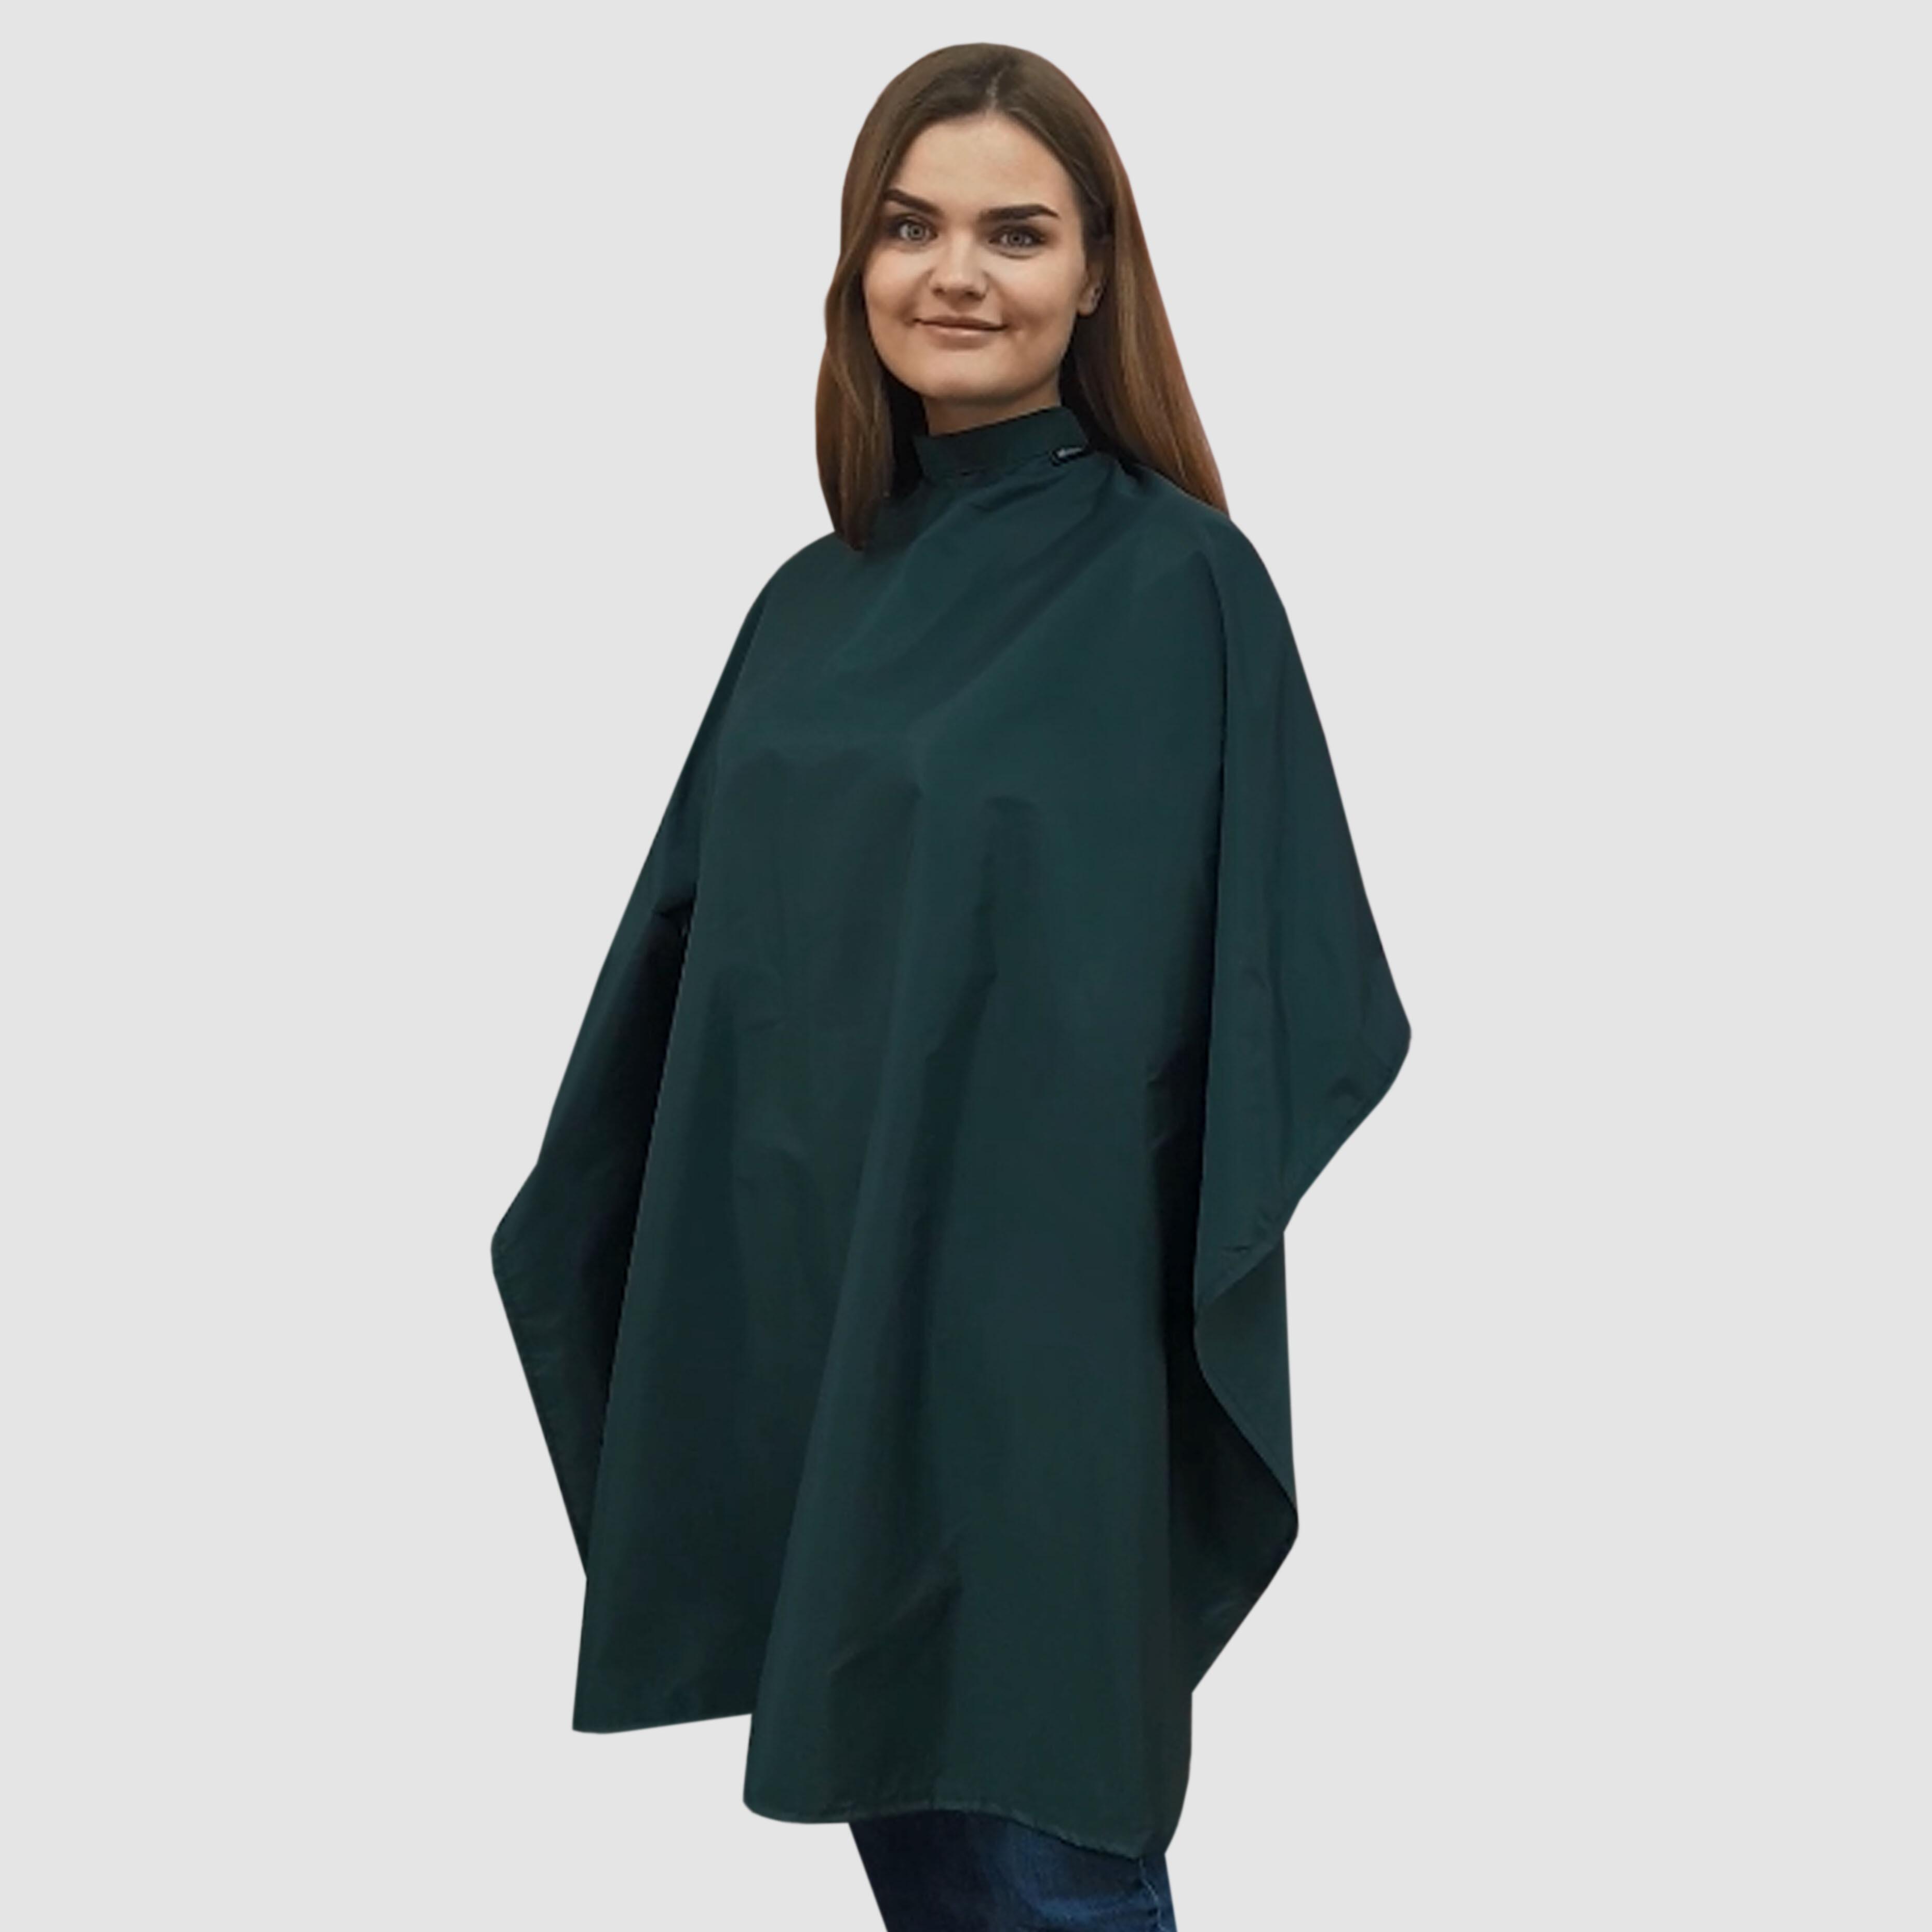 Nibano Hairdressing gown bottle green